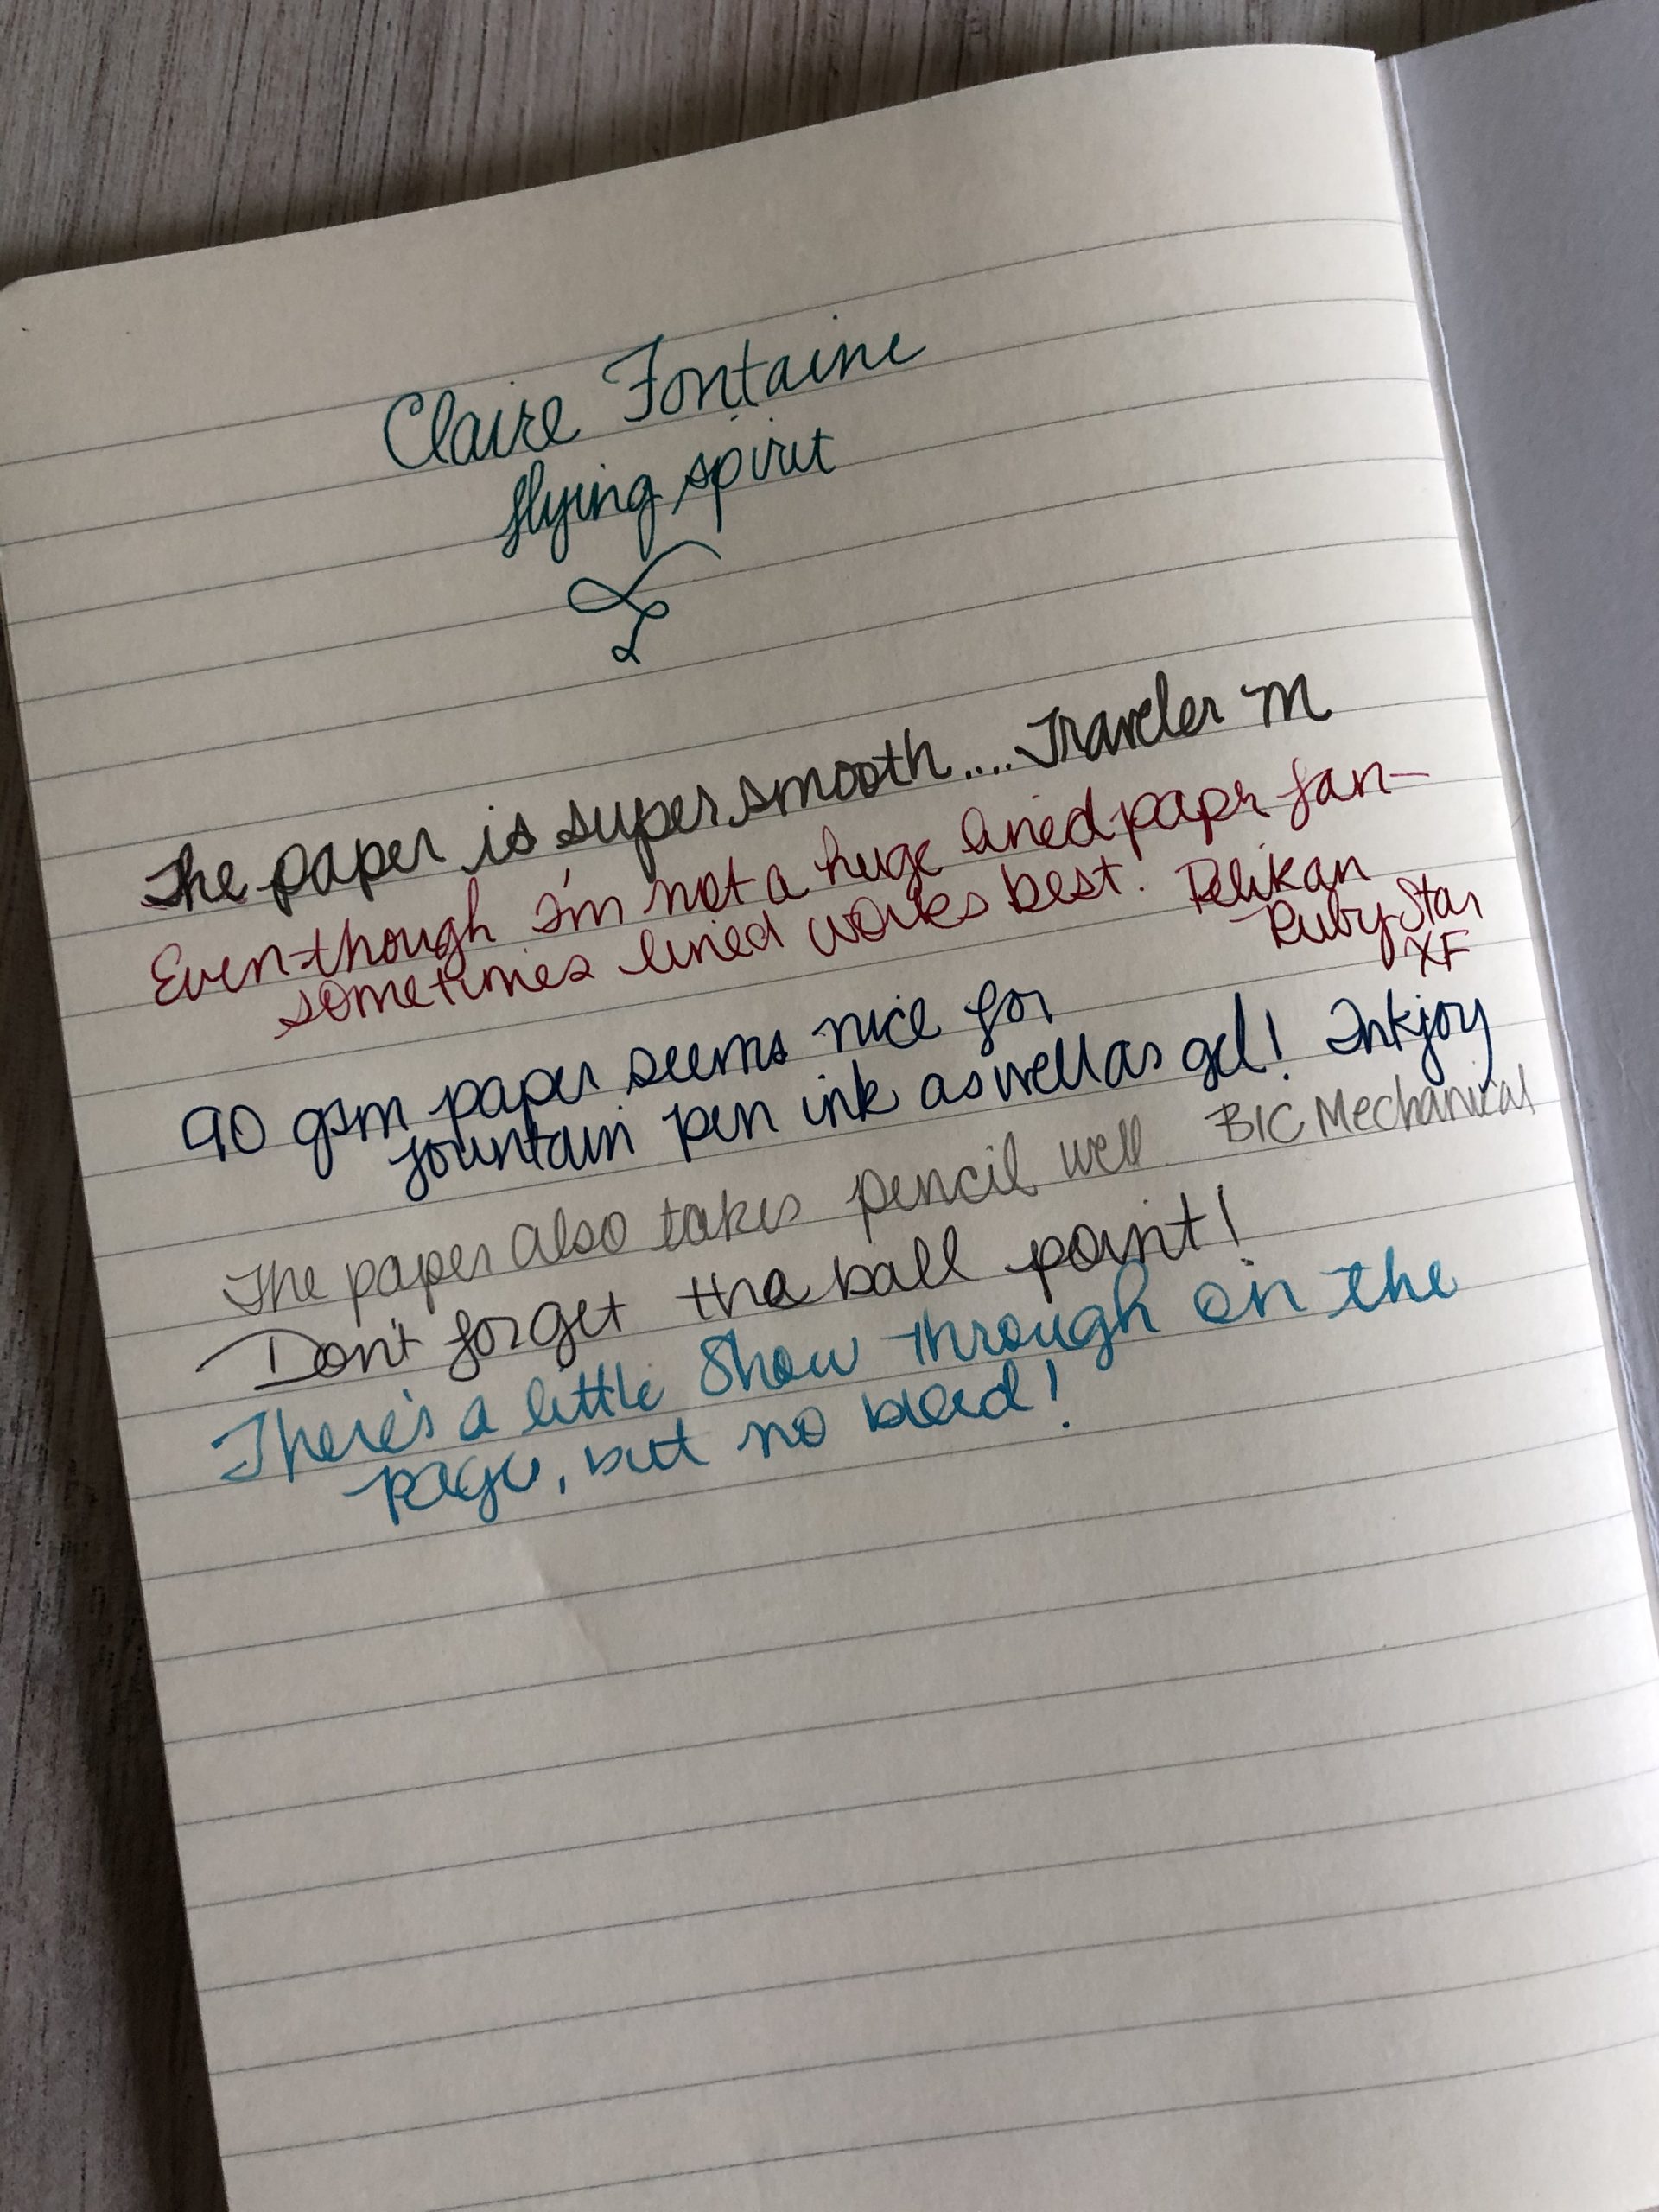 Notebook Review: Clairefontaine Flying Spirit A5 Sewn Spine